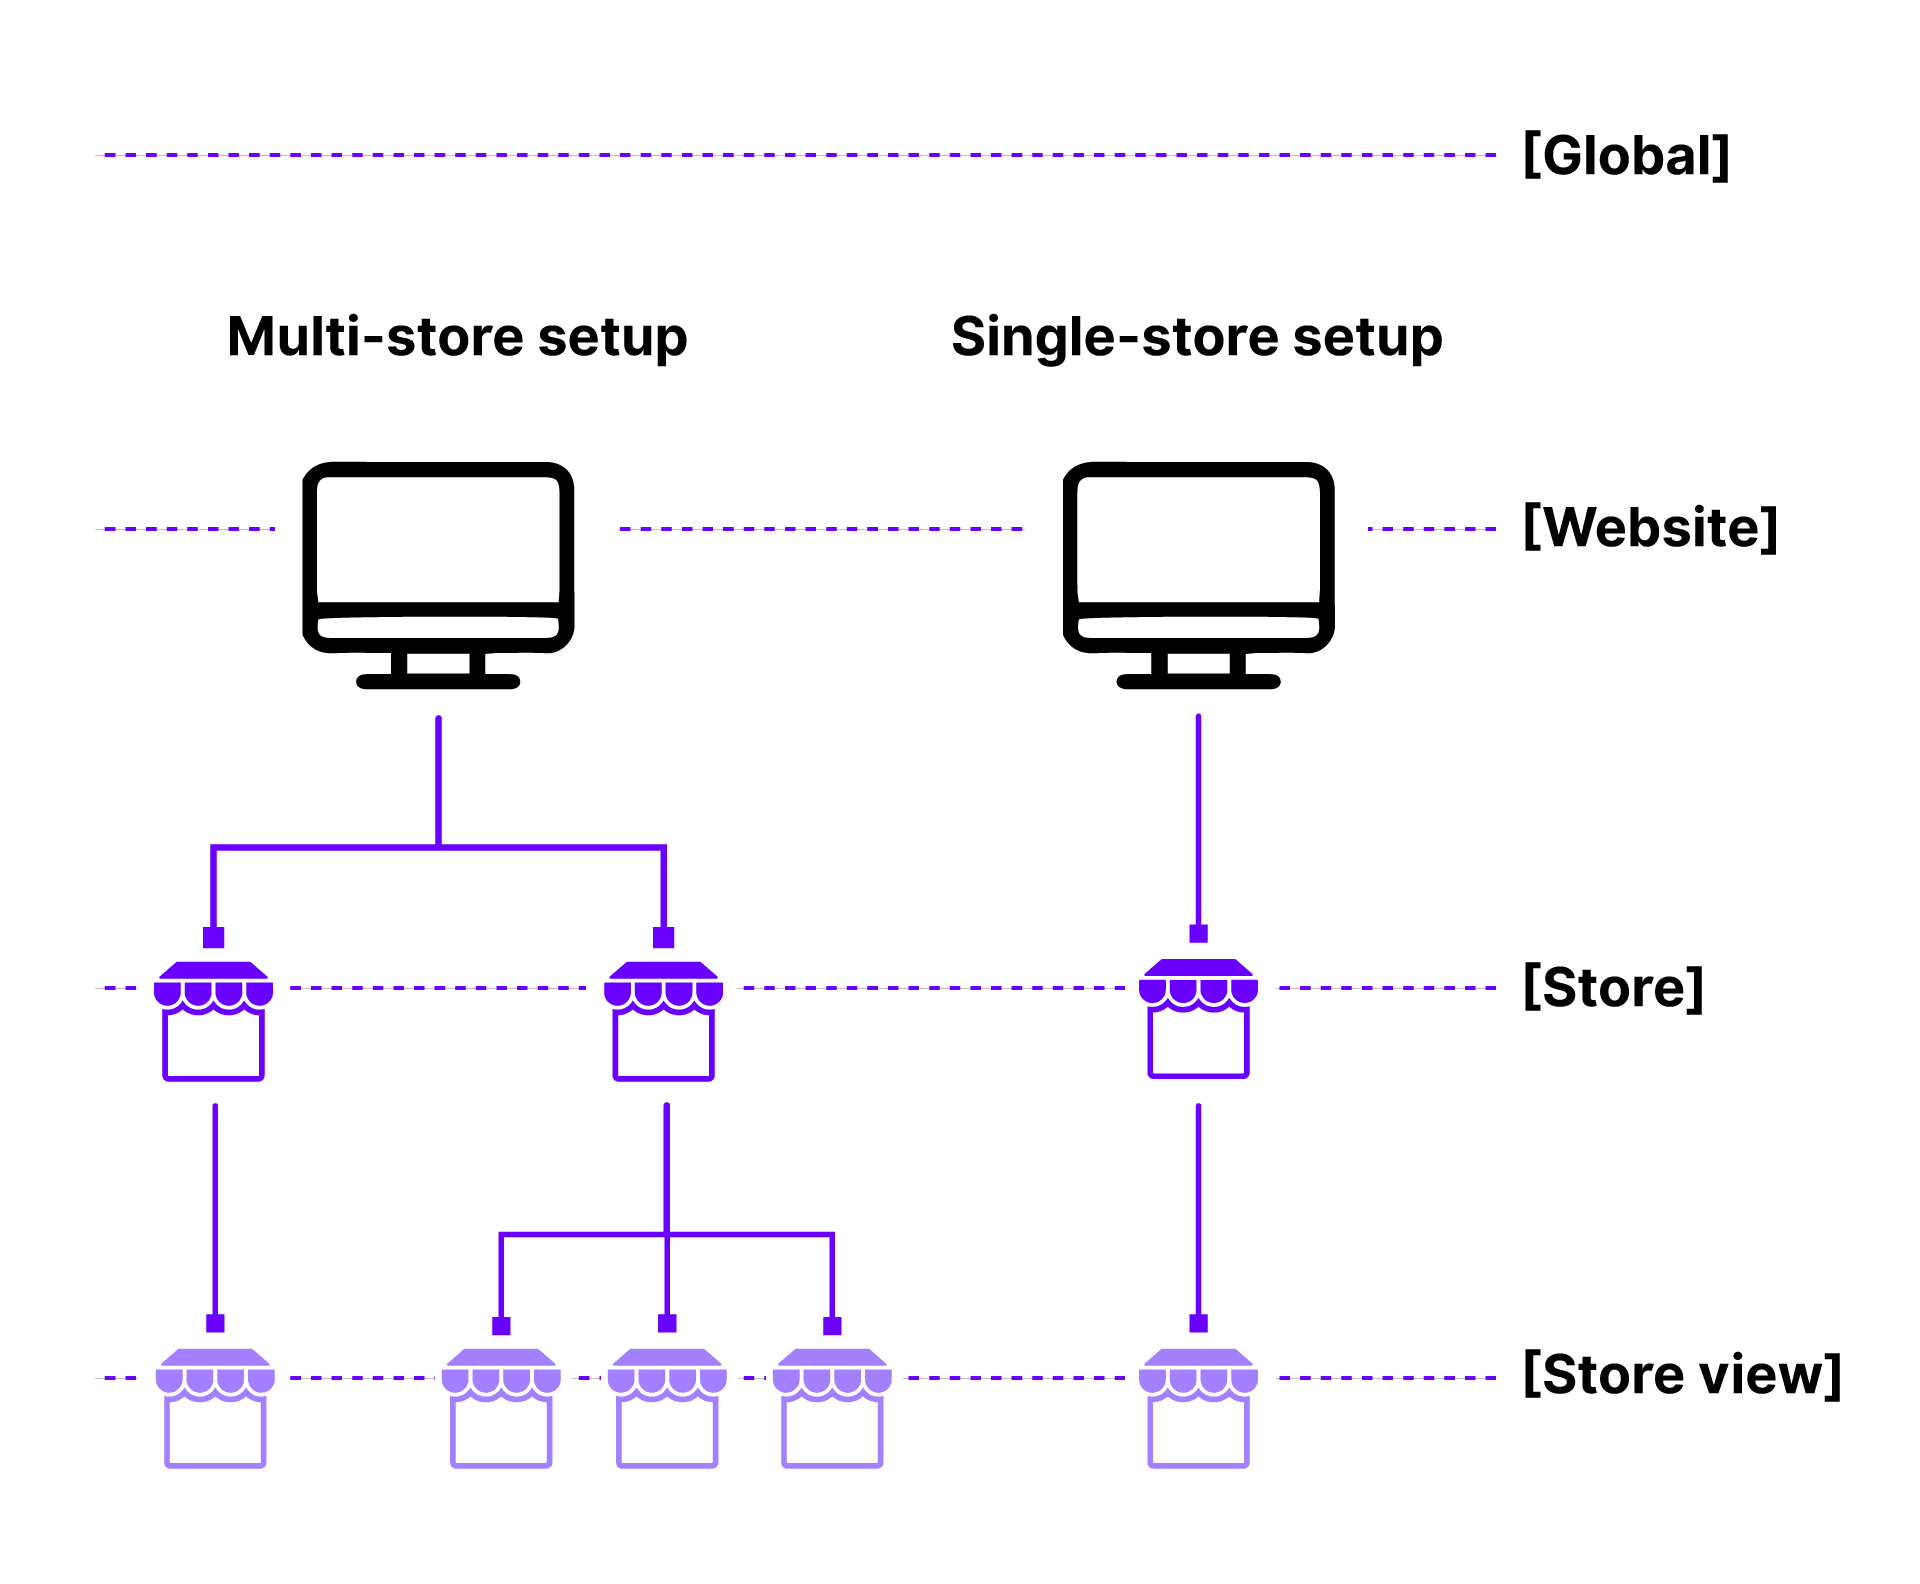 The structure of a multi-store versus a single store.